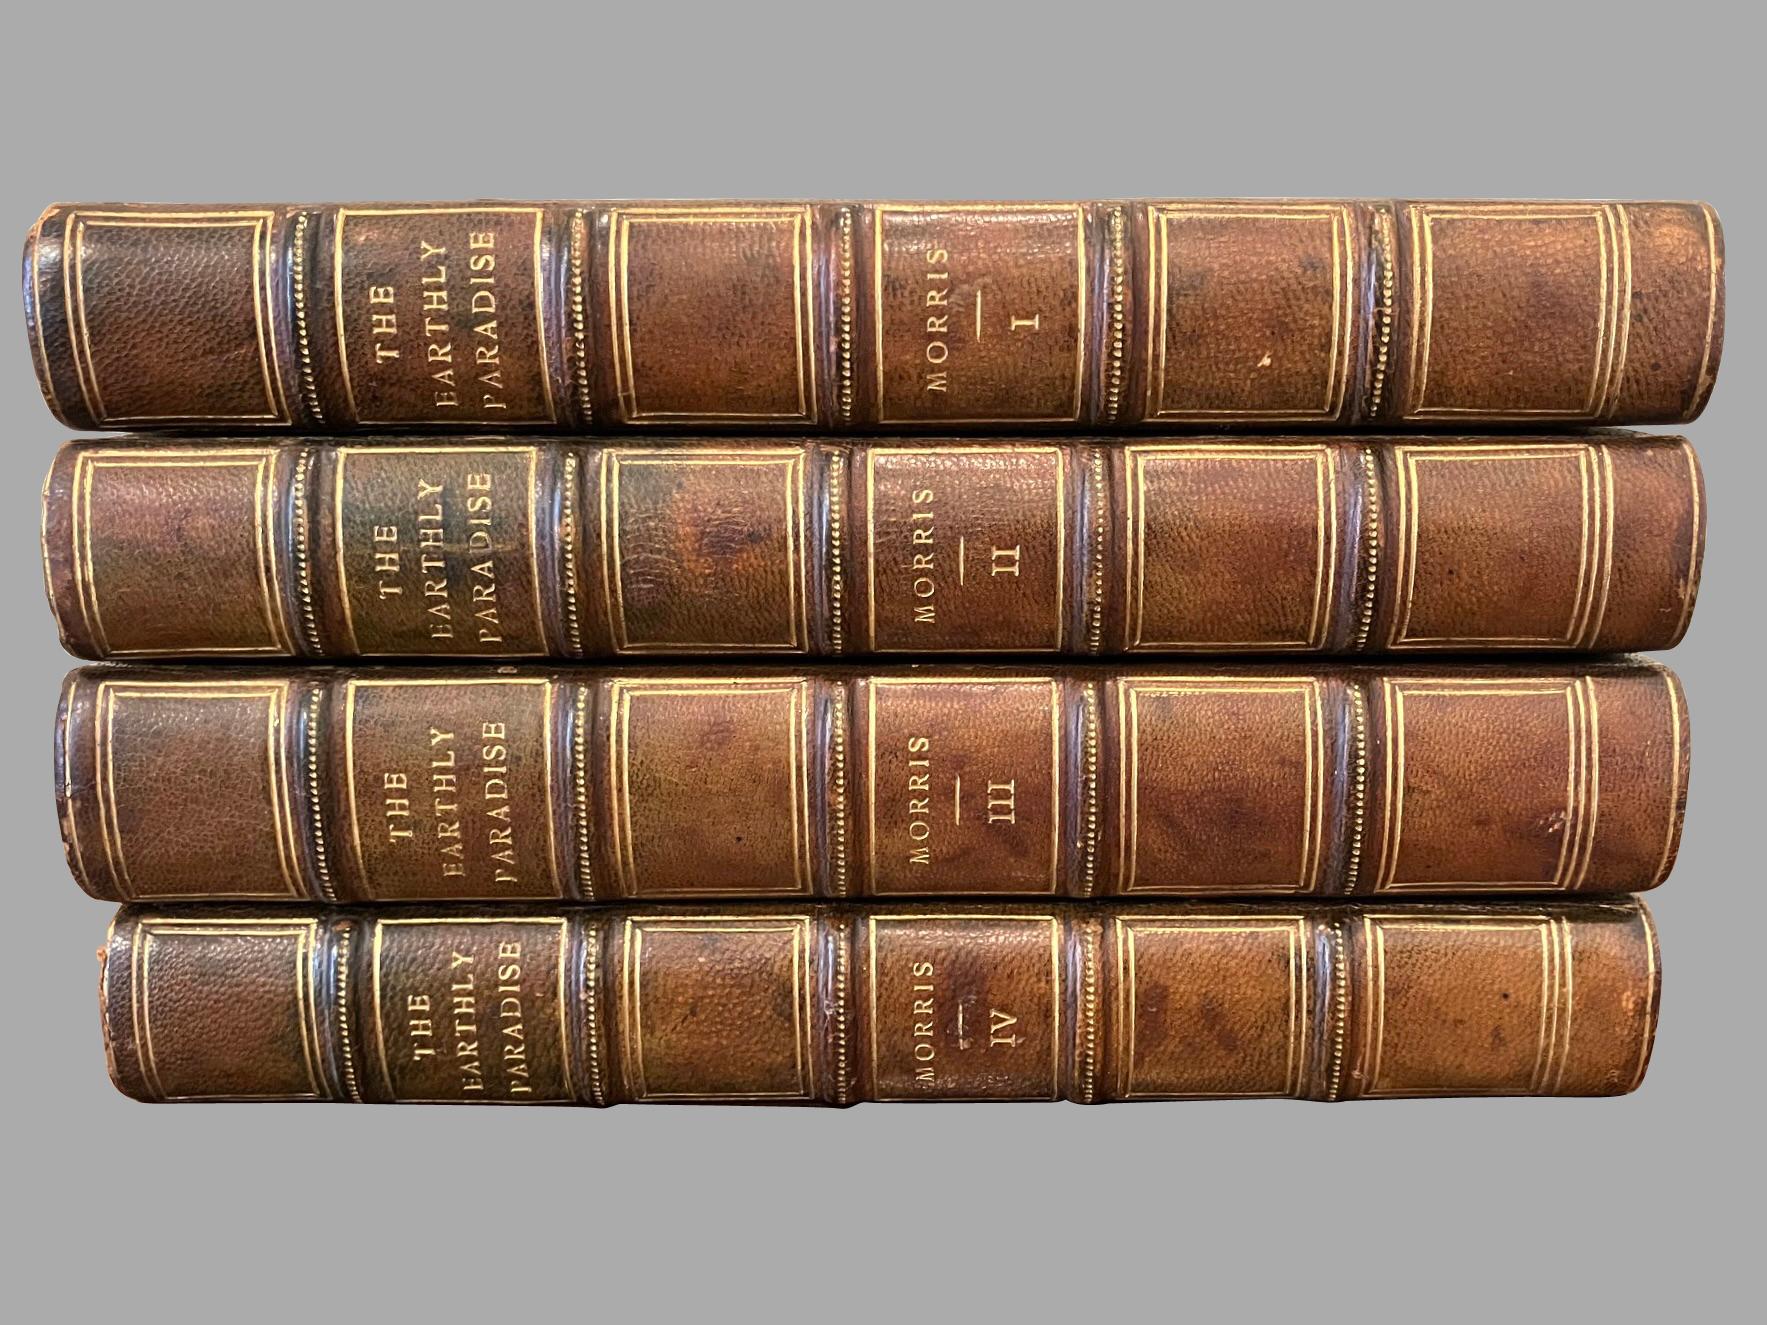 English The Earthly Paradise: A Poem by William Morris in 4 Leatherbound Volumes For Sale